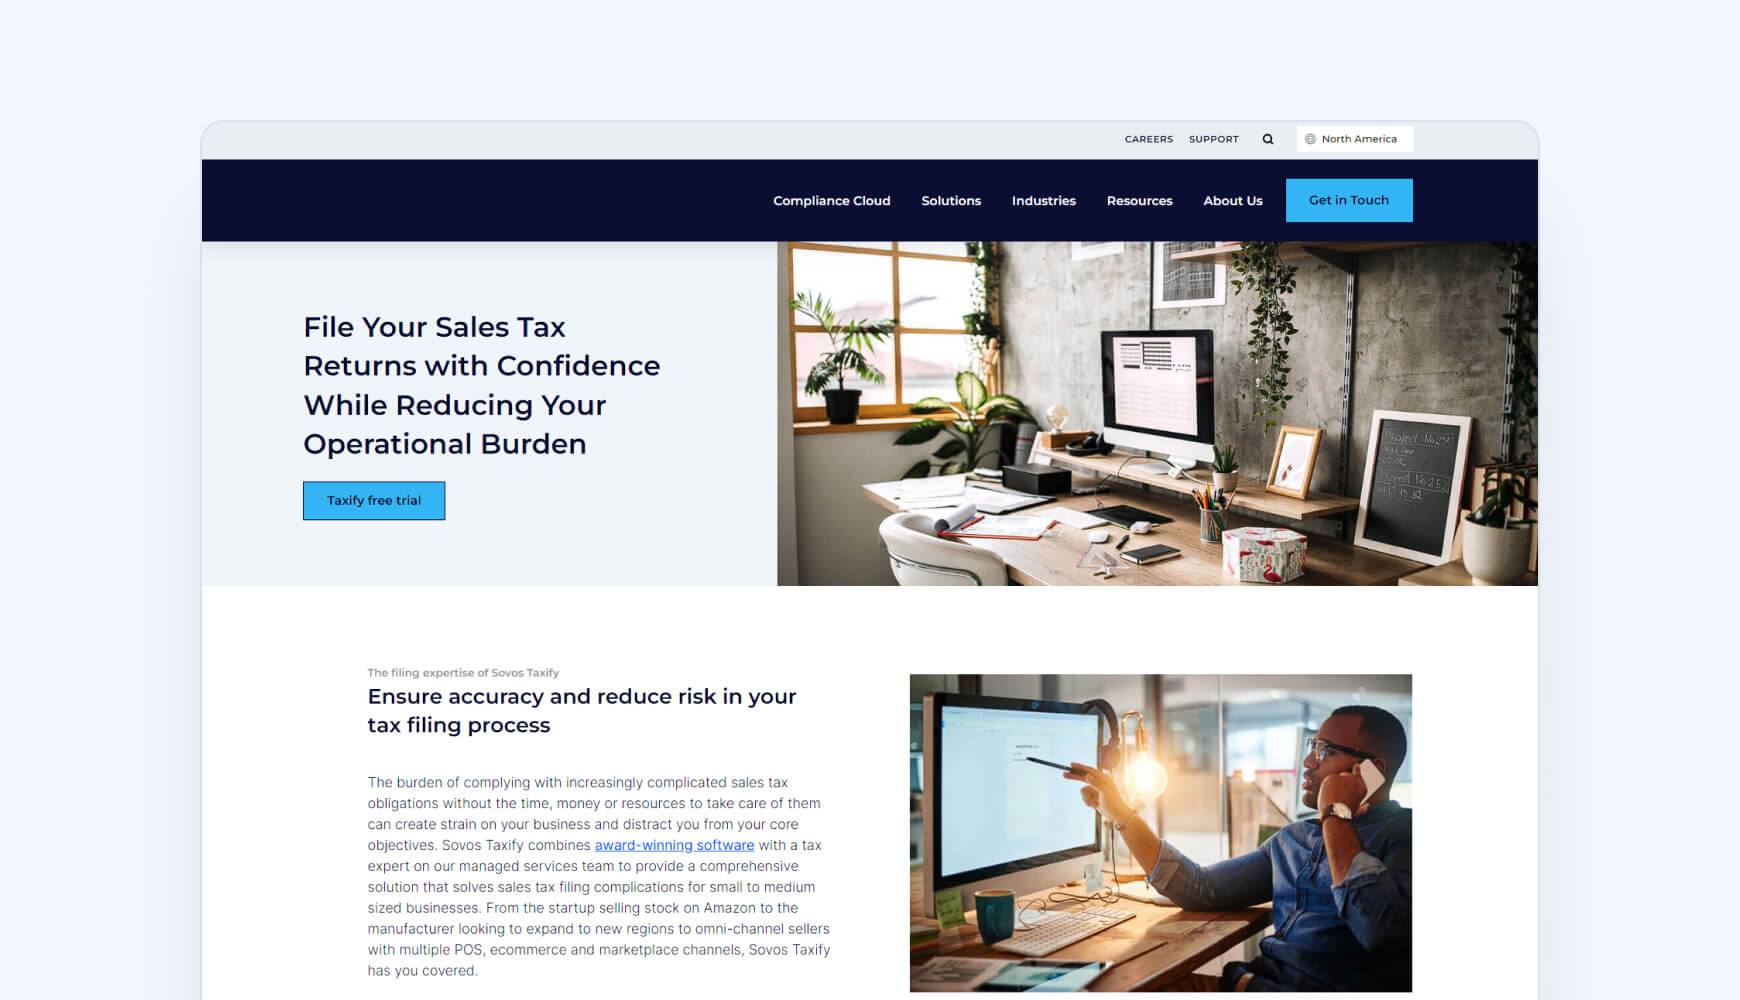 Sales tax automation software Taxify